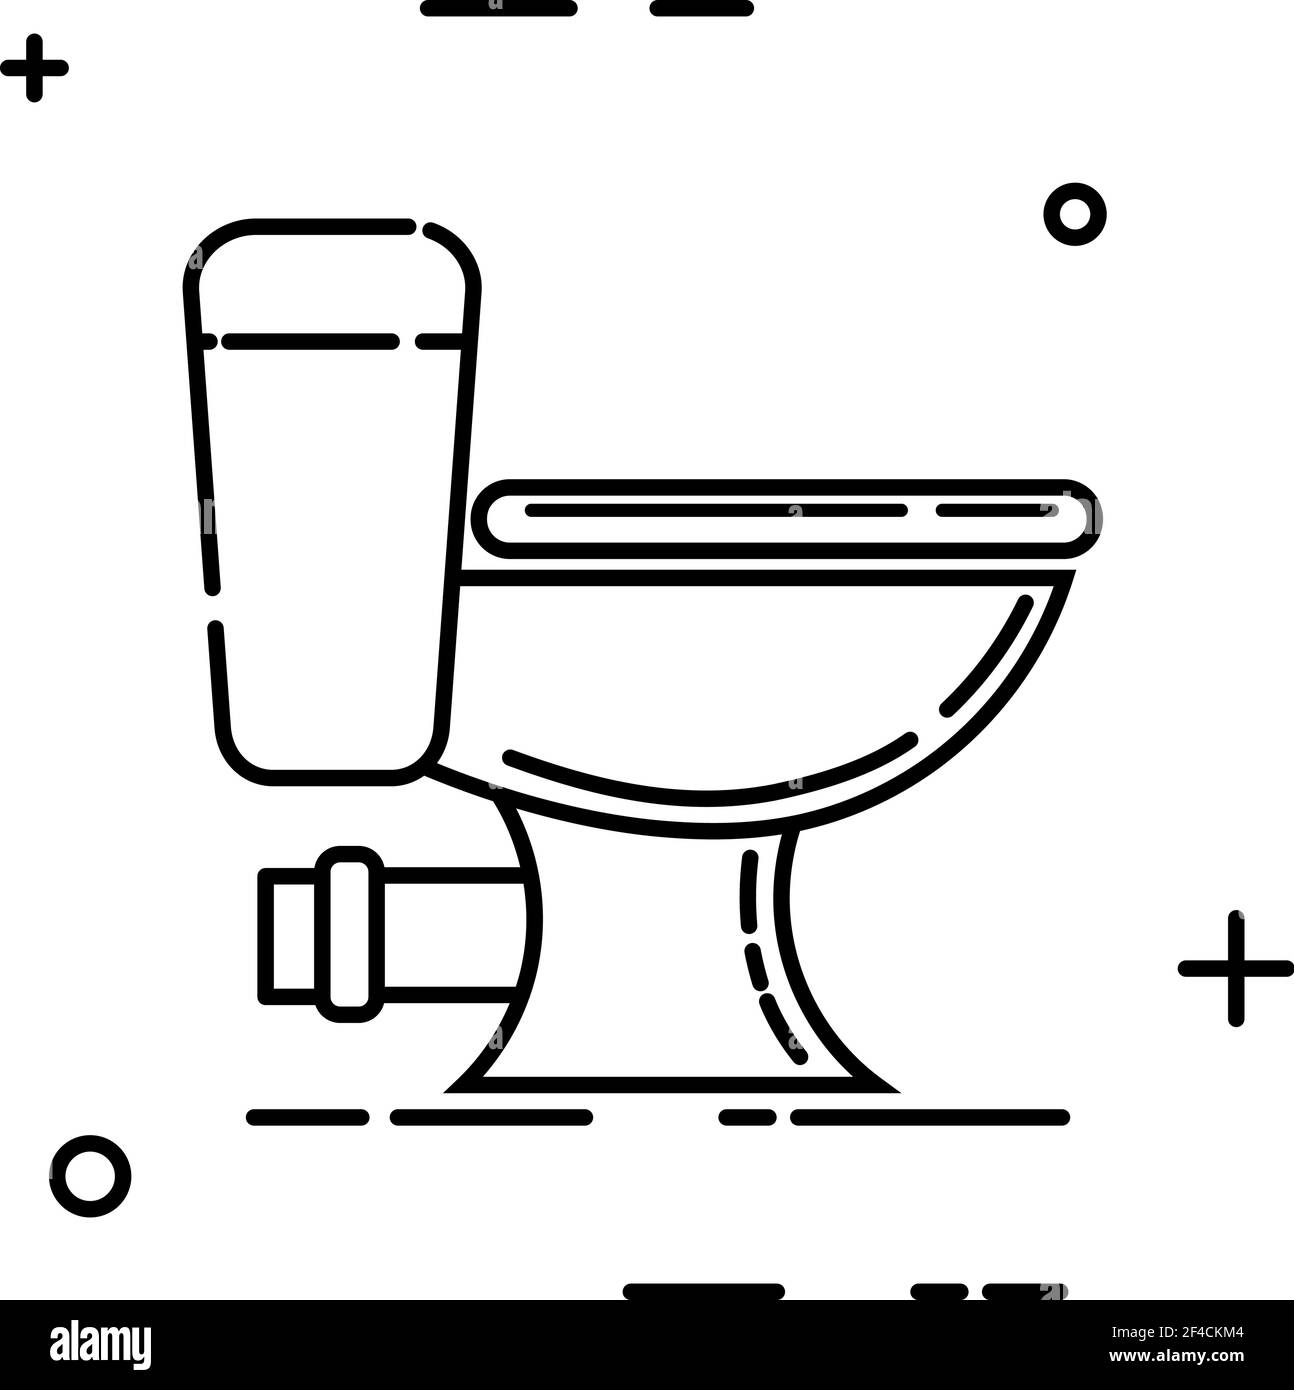 Abstract black bowl toilet icon on white background. Symbol of hygiene and cleanliness of the toilet. Vector illustration Stock Vector